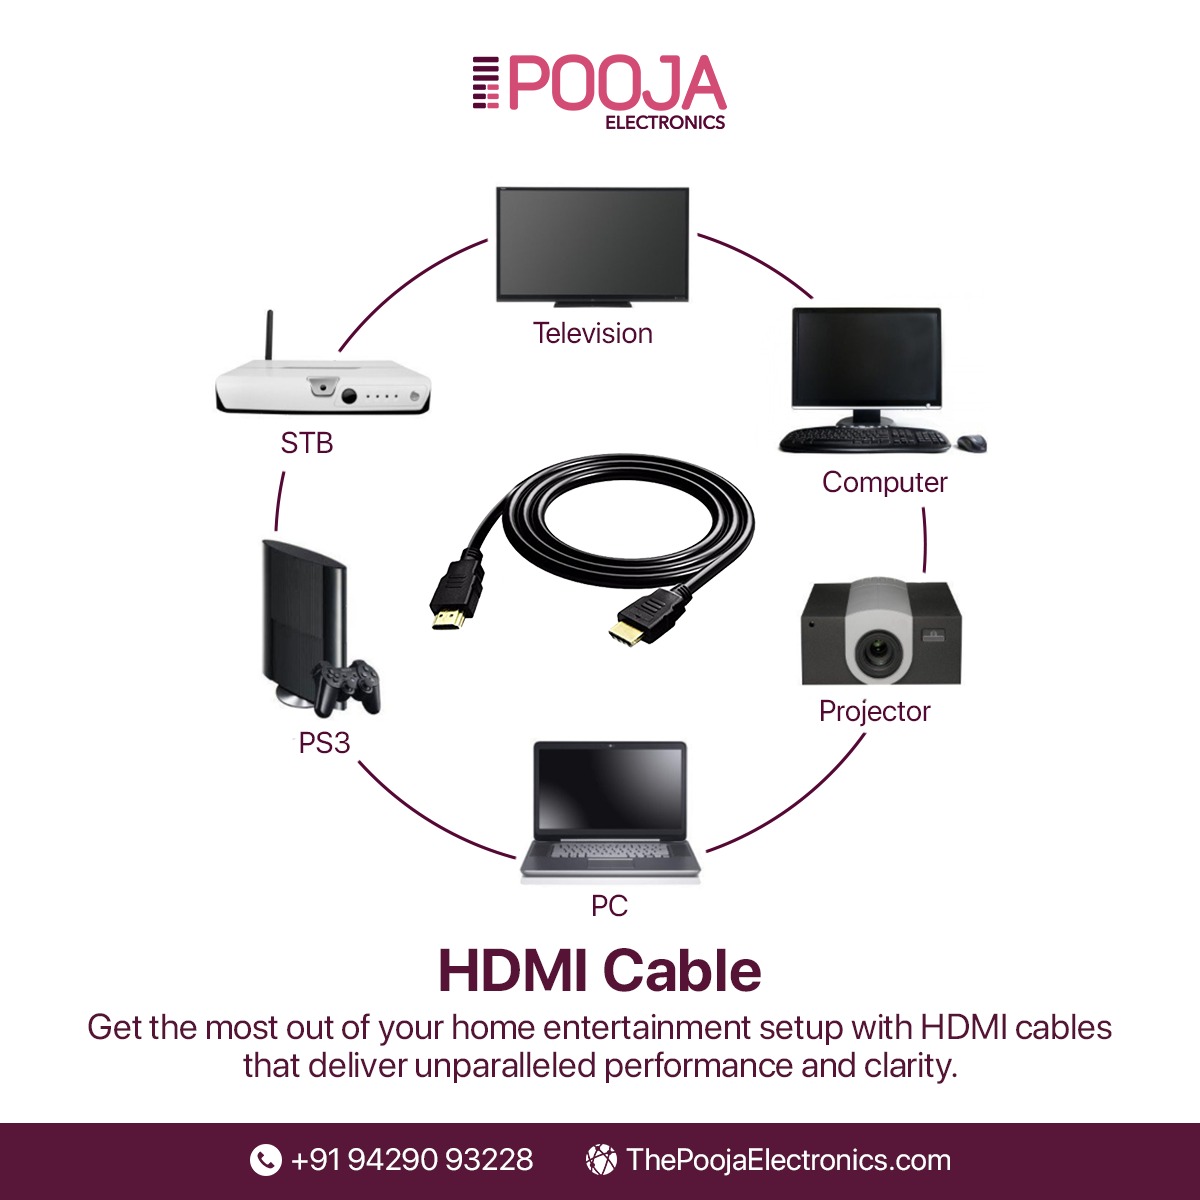 Experience superior connectivity and picture quality with our HDMI cables.
.
.
.
#poojaelectronics #HDMICables #HighDefinition #Connectivity #AudioVideo #HomeTheater #Entertainment #TechAccessories #DigitalConnections #TrustedRepairs #audiovisualsolutions #DeviceCompatibility